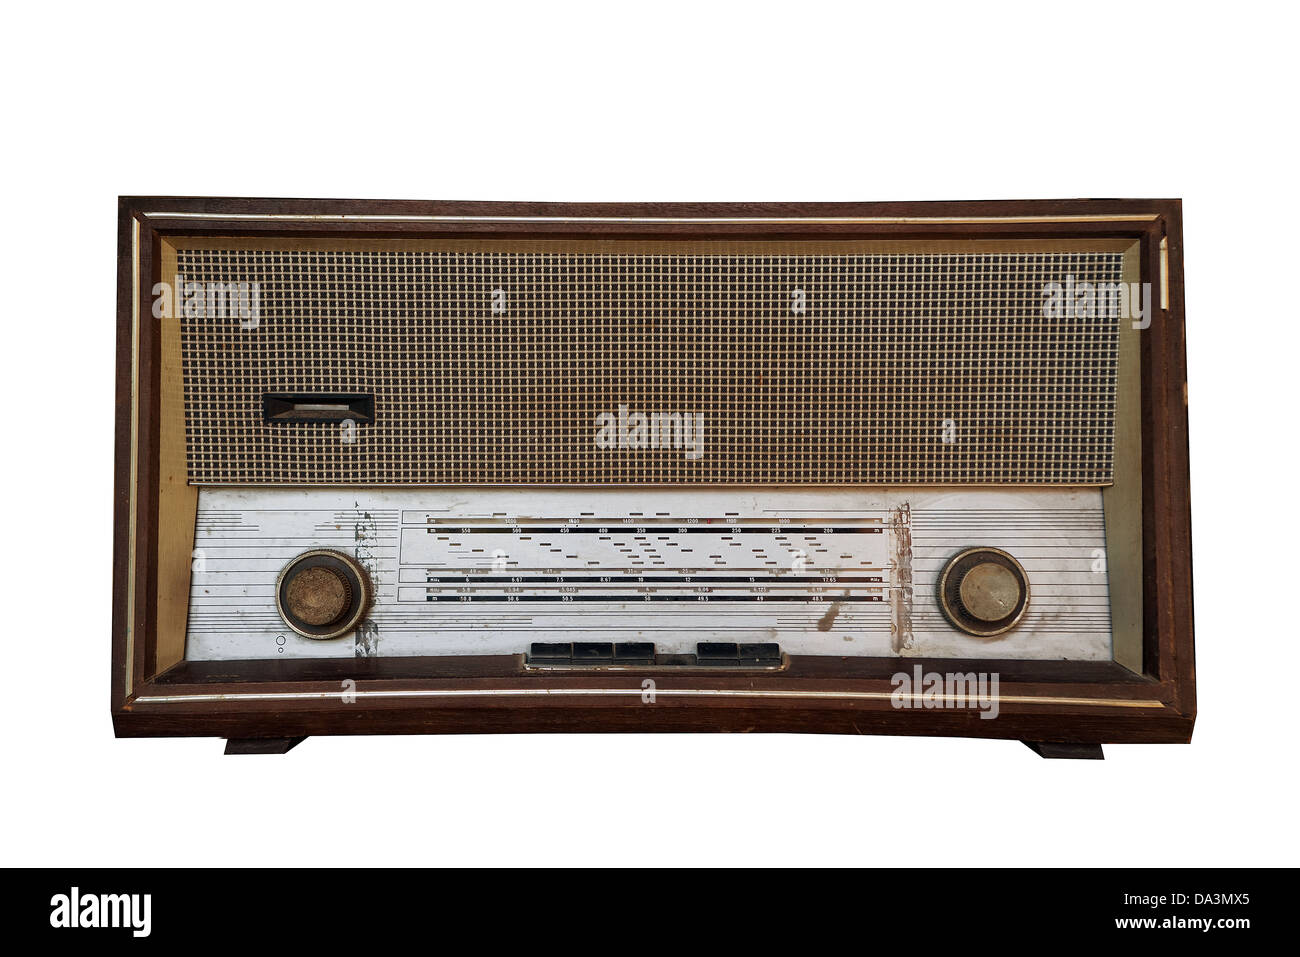 Beautiful old vintage wooden radio receiver device Stock Photo